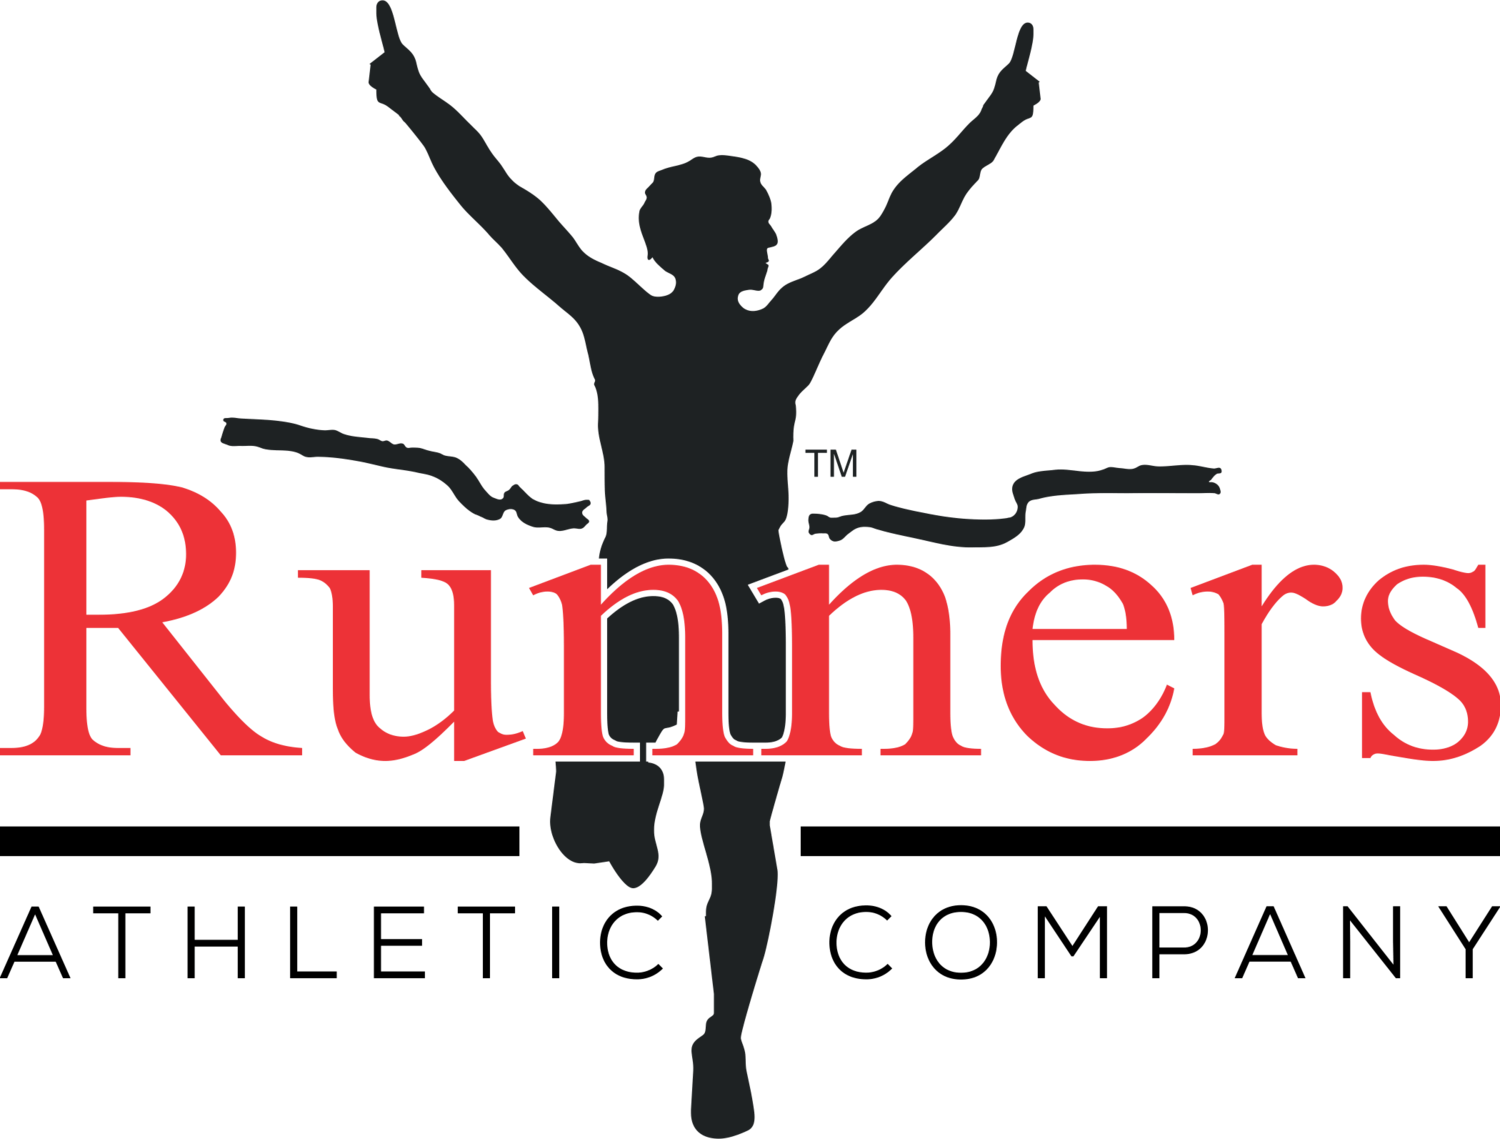 Athletic Company Logo - Runners Athletic Co.